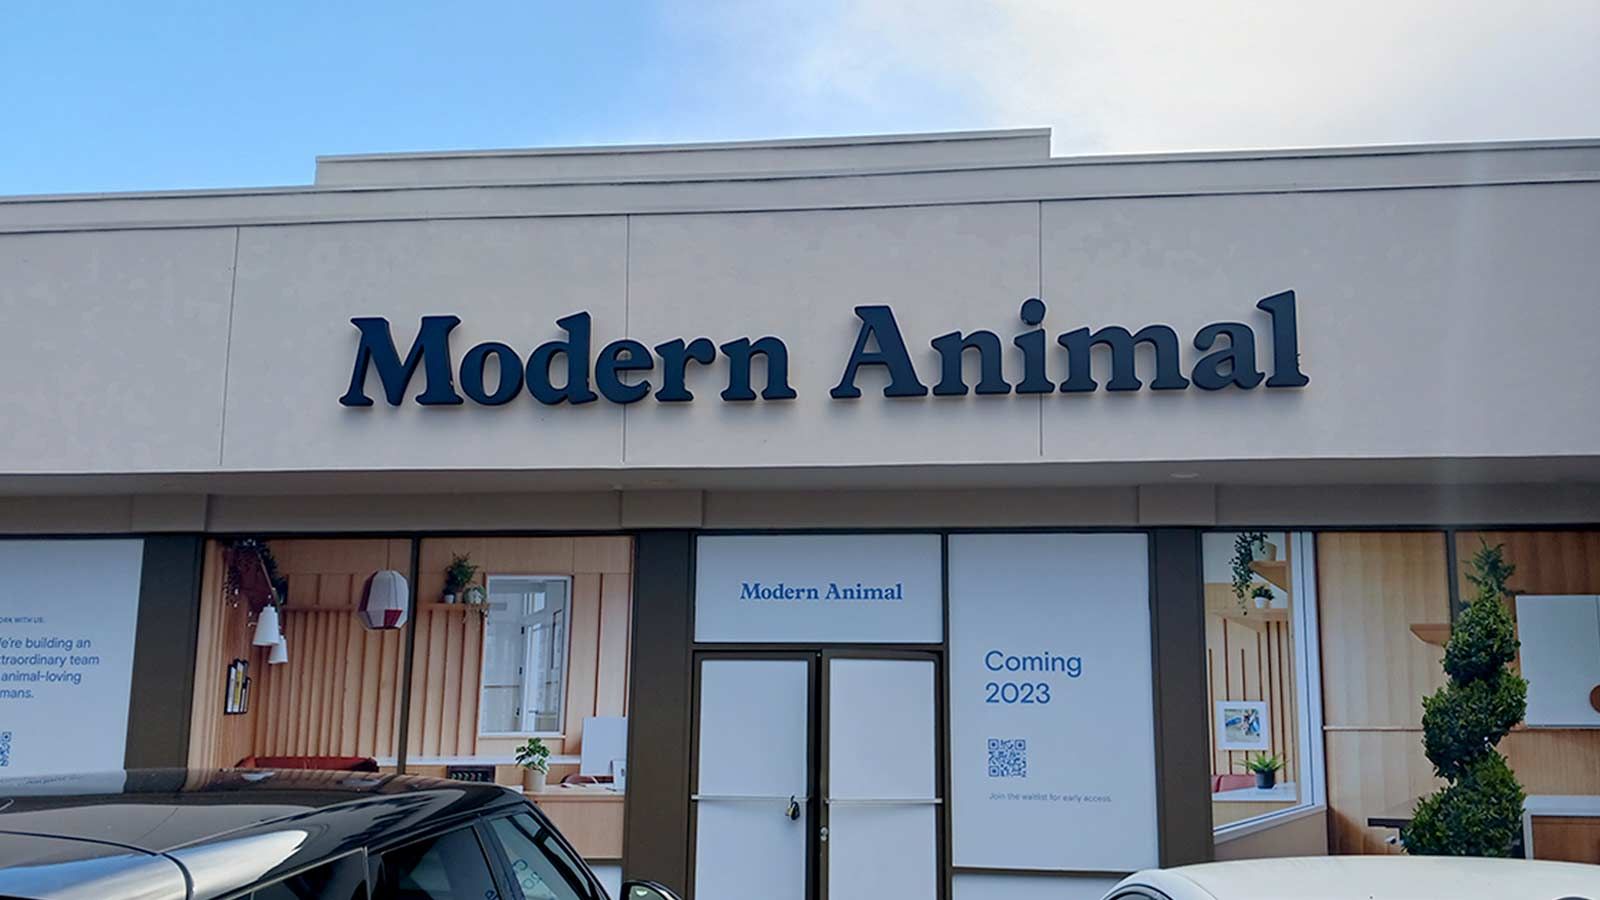 Modern Animal backlit letters attached to the storefront